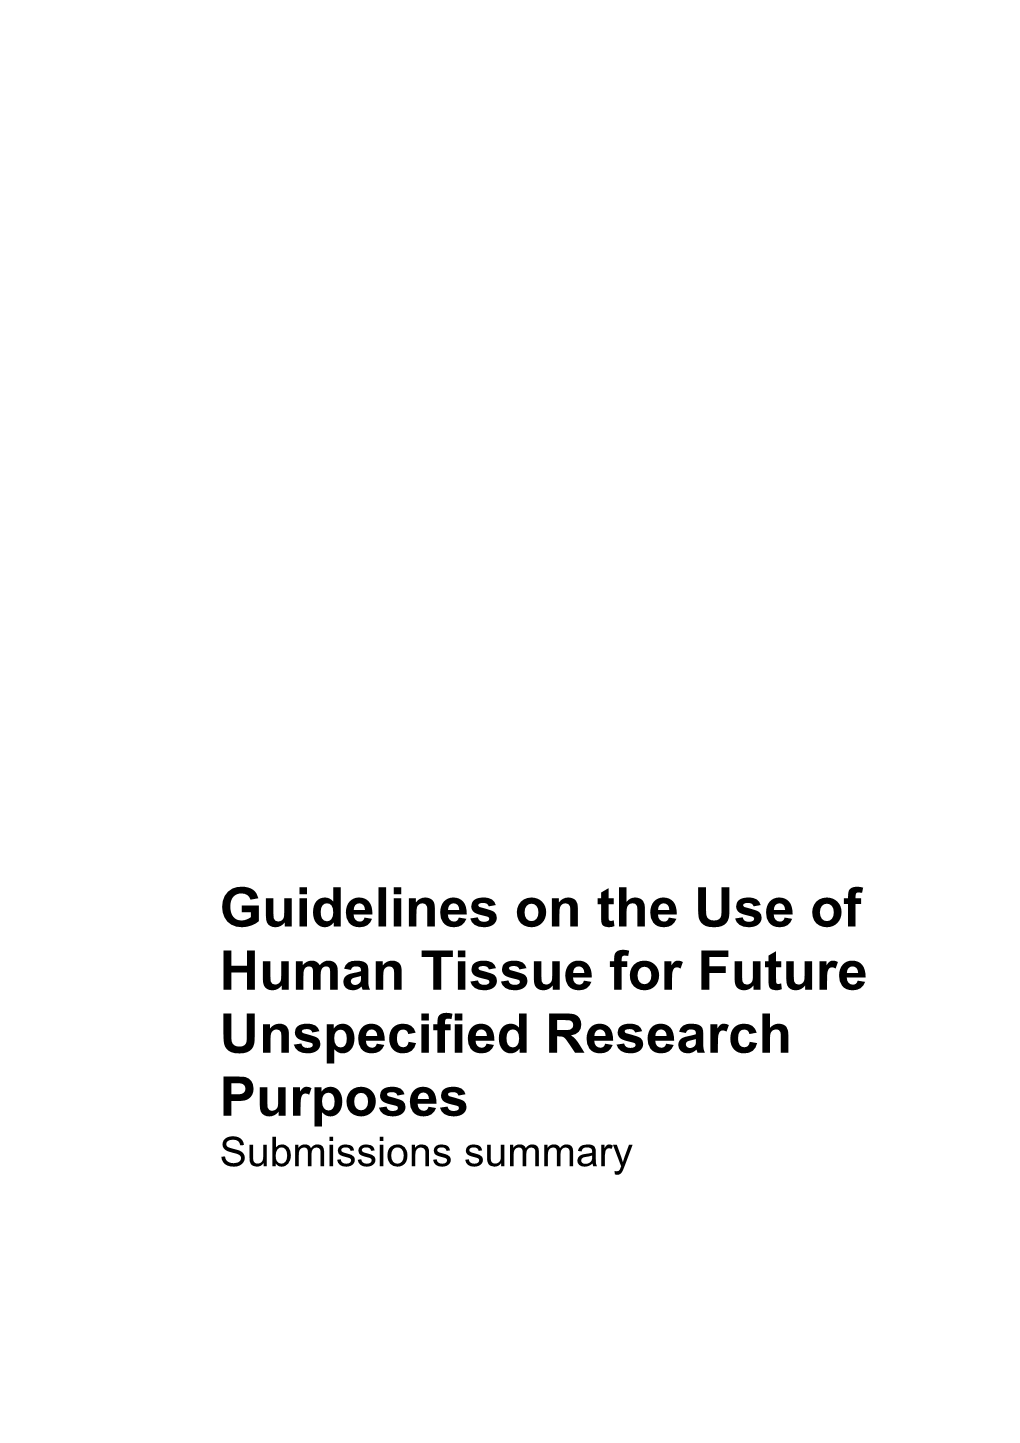 Guidelines on the Use of Human Tissue for Futre Unspecified Research Purposes: Submissions